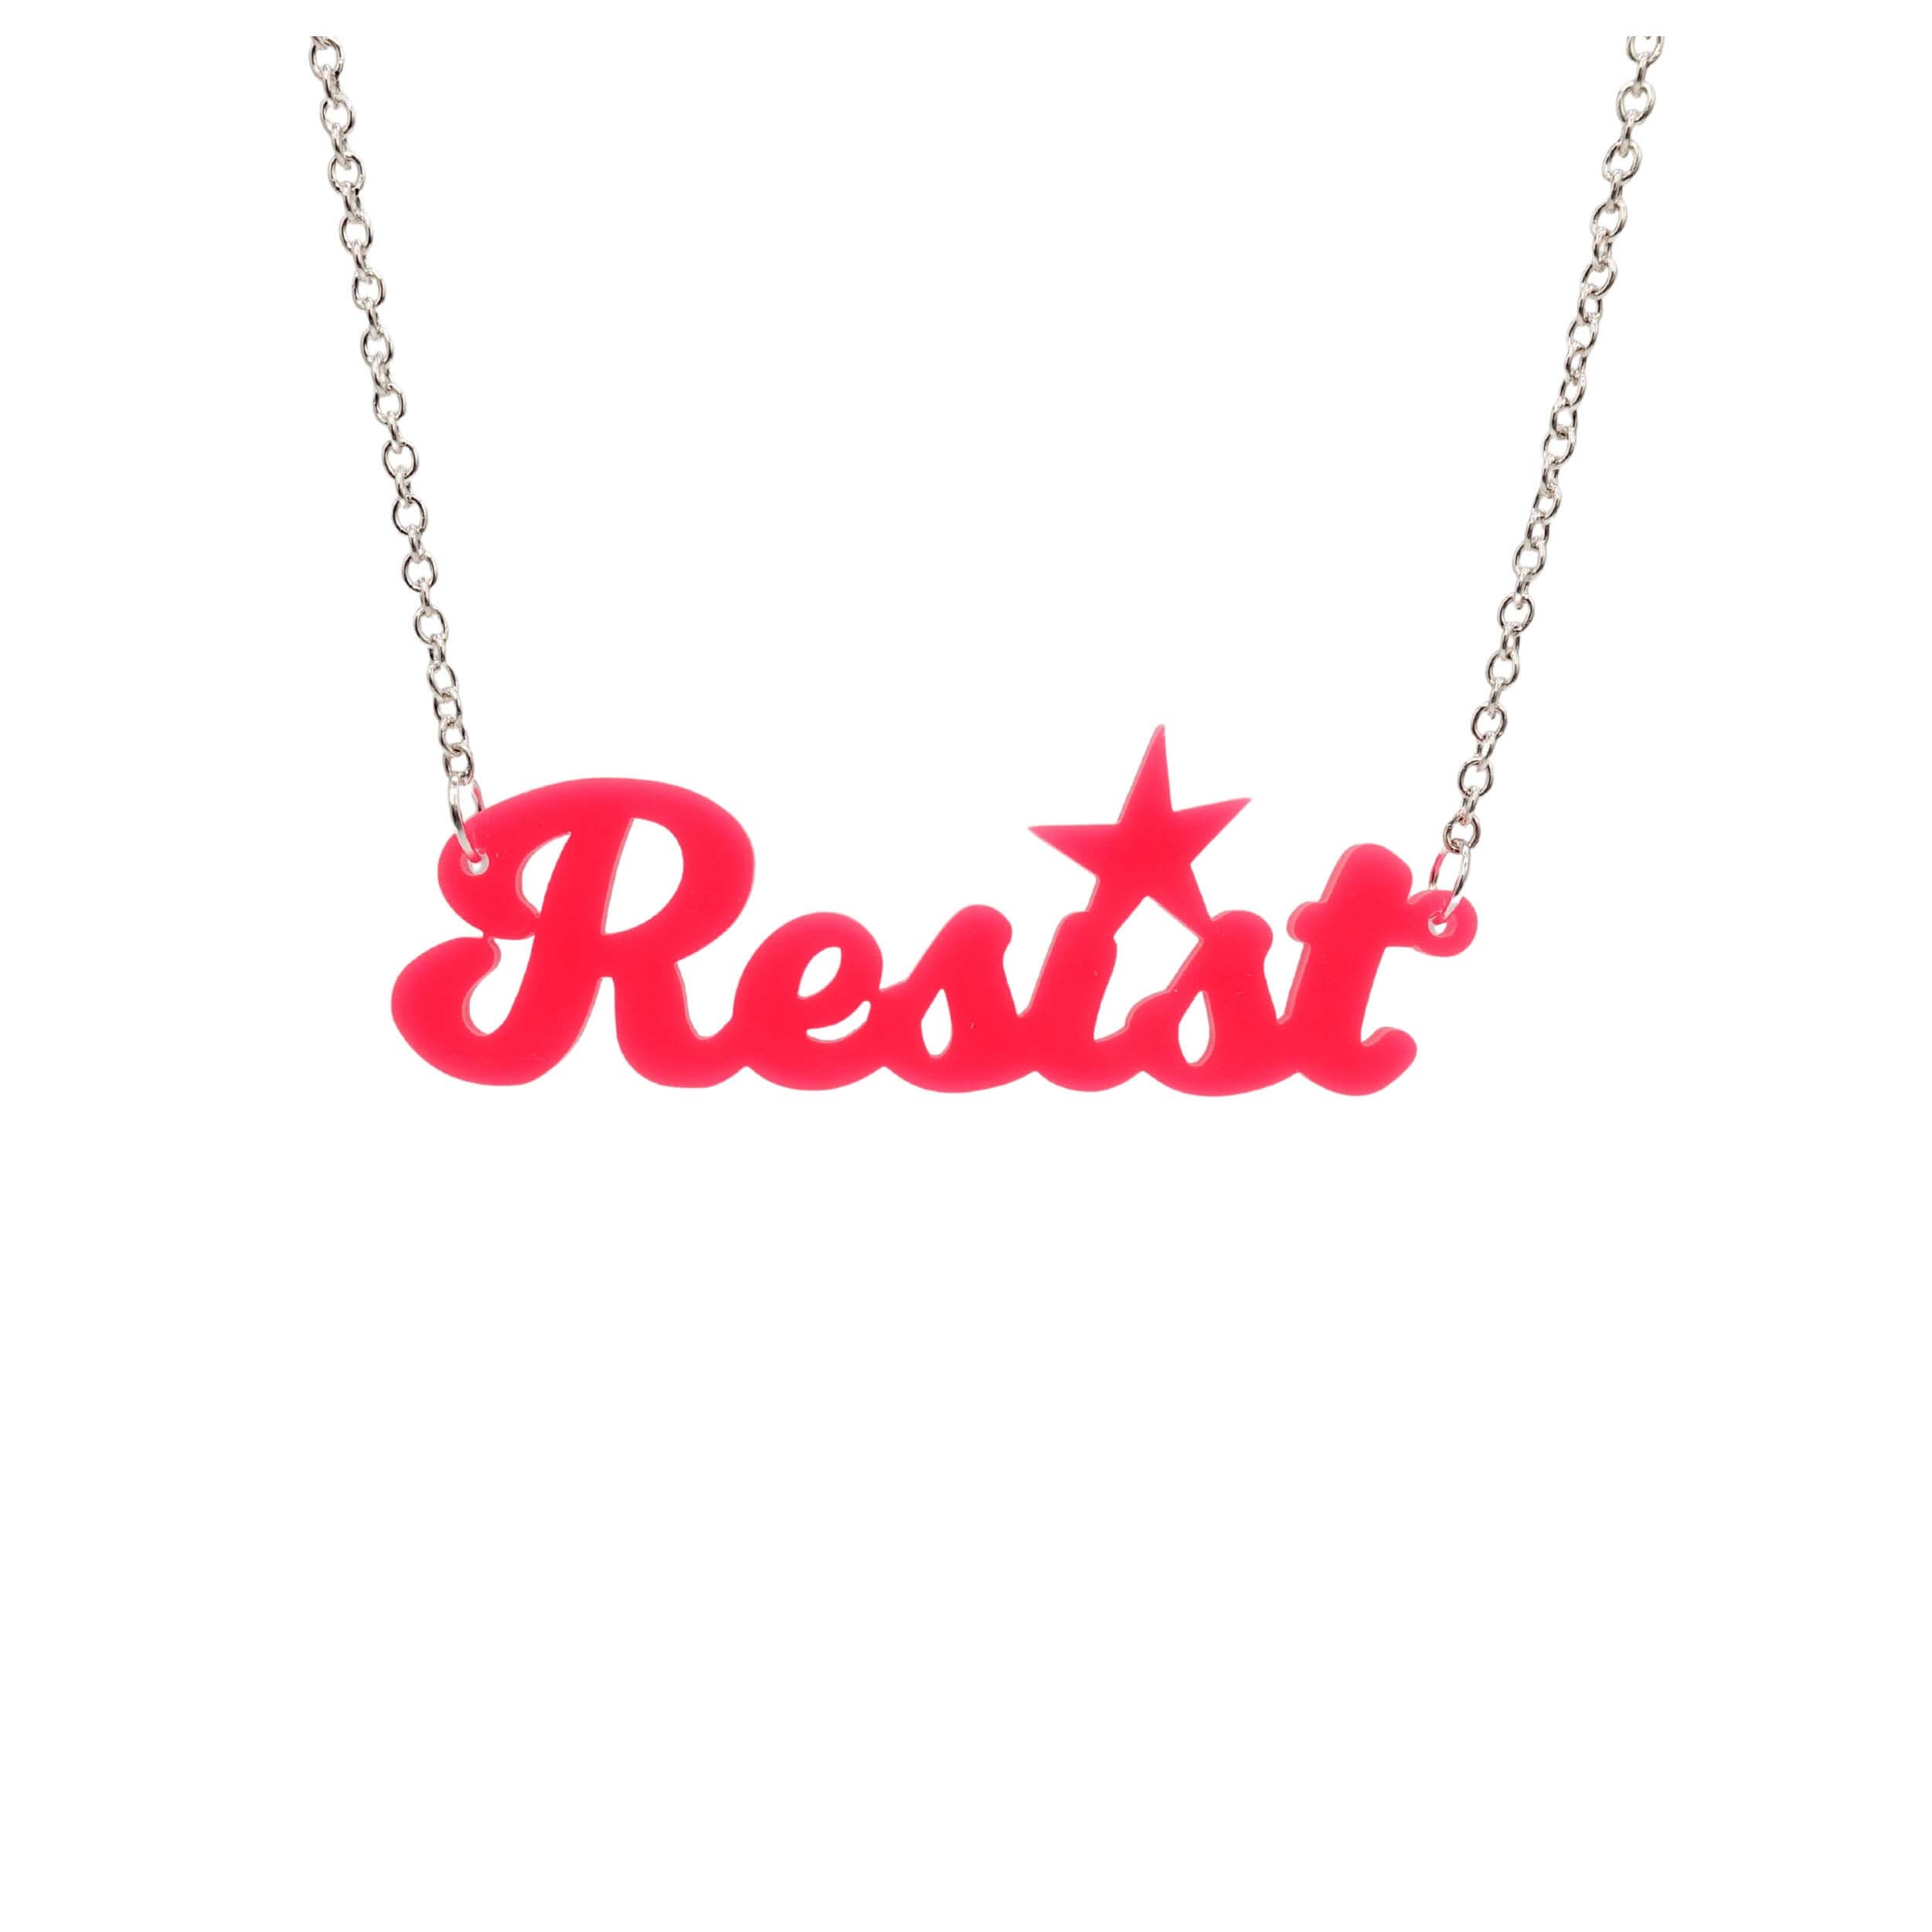 Hot pink script Resist necklace shown hanging against a white background. 